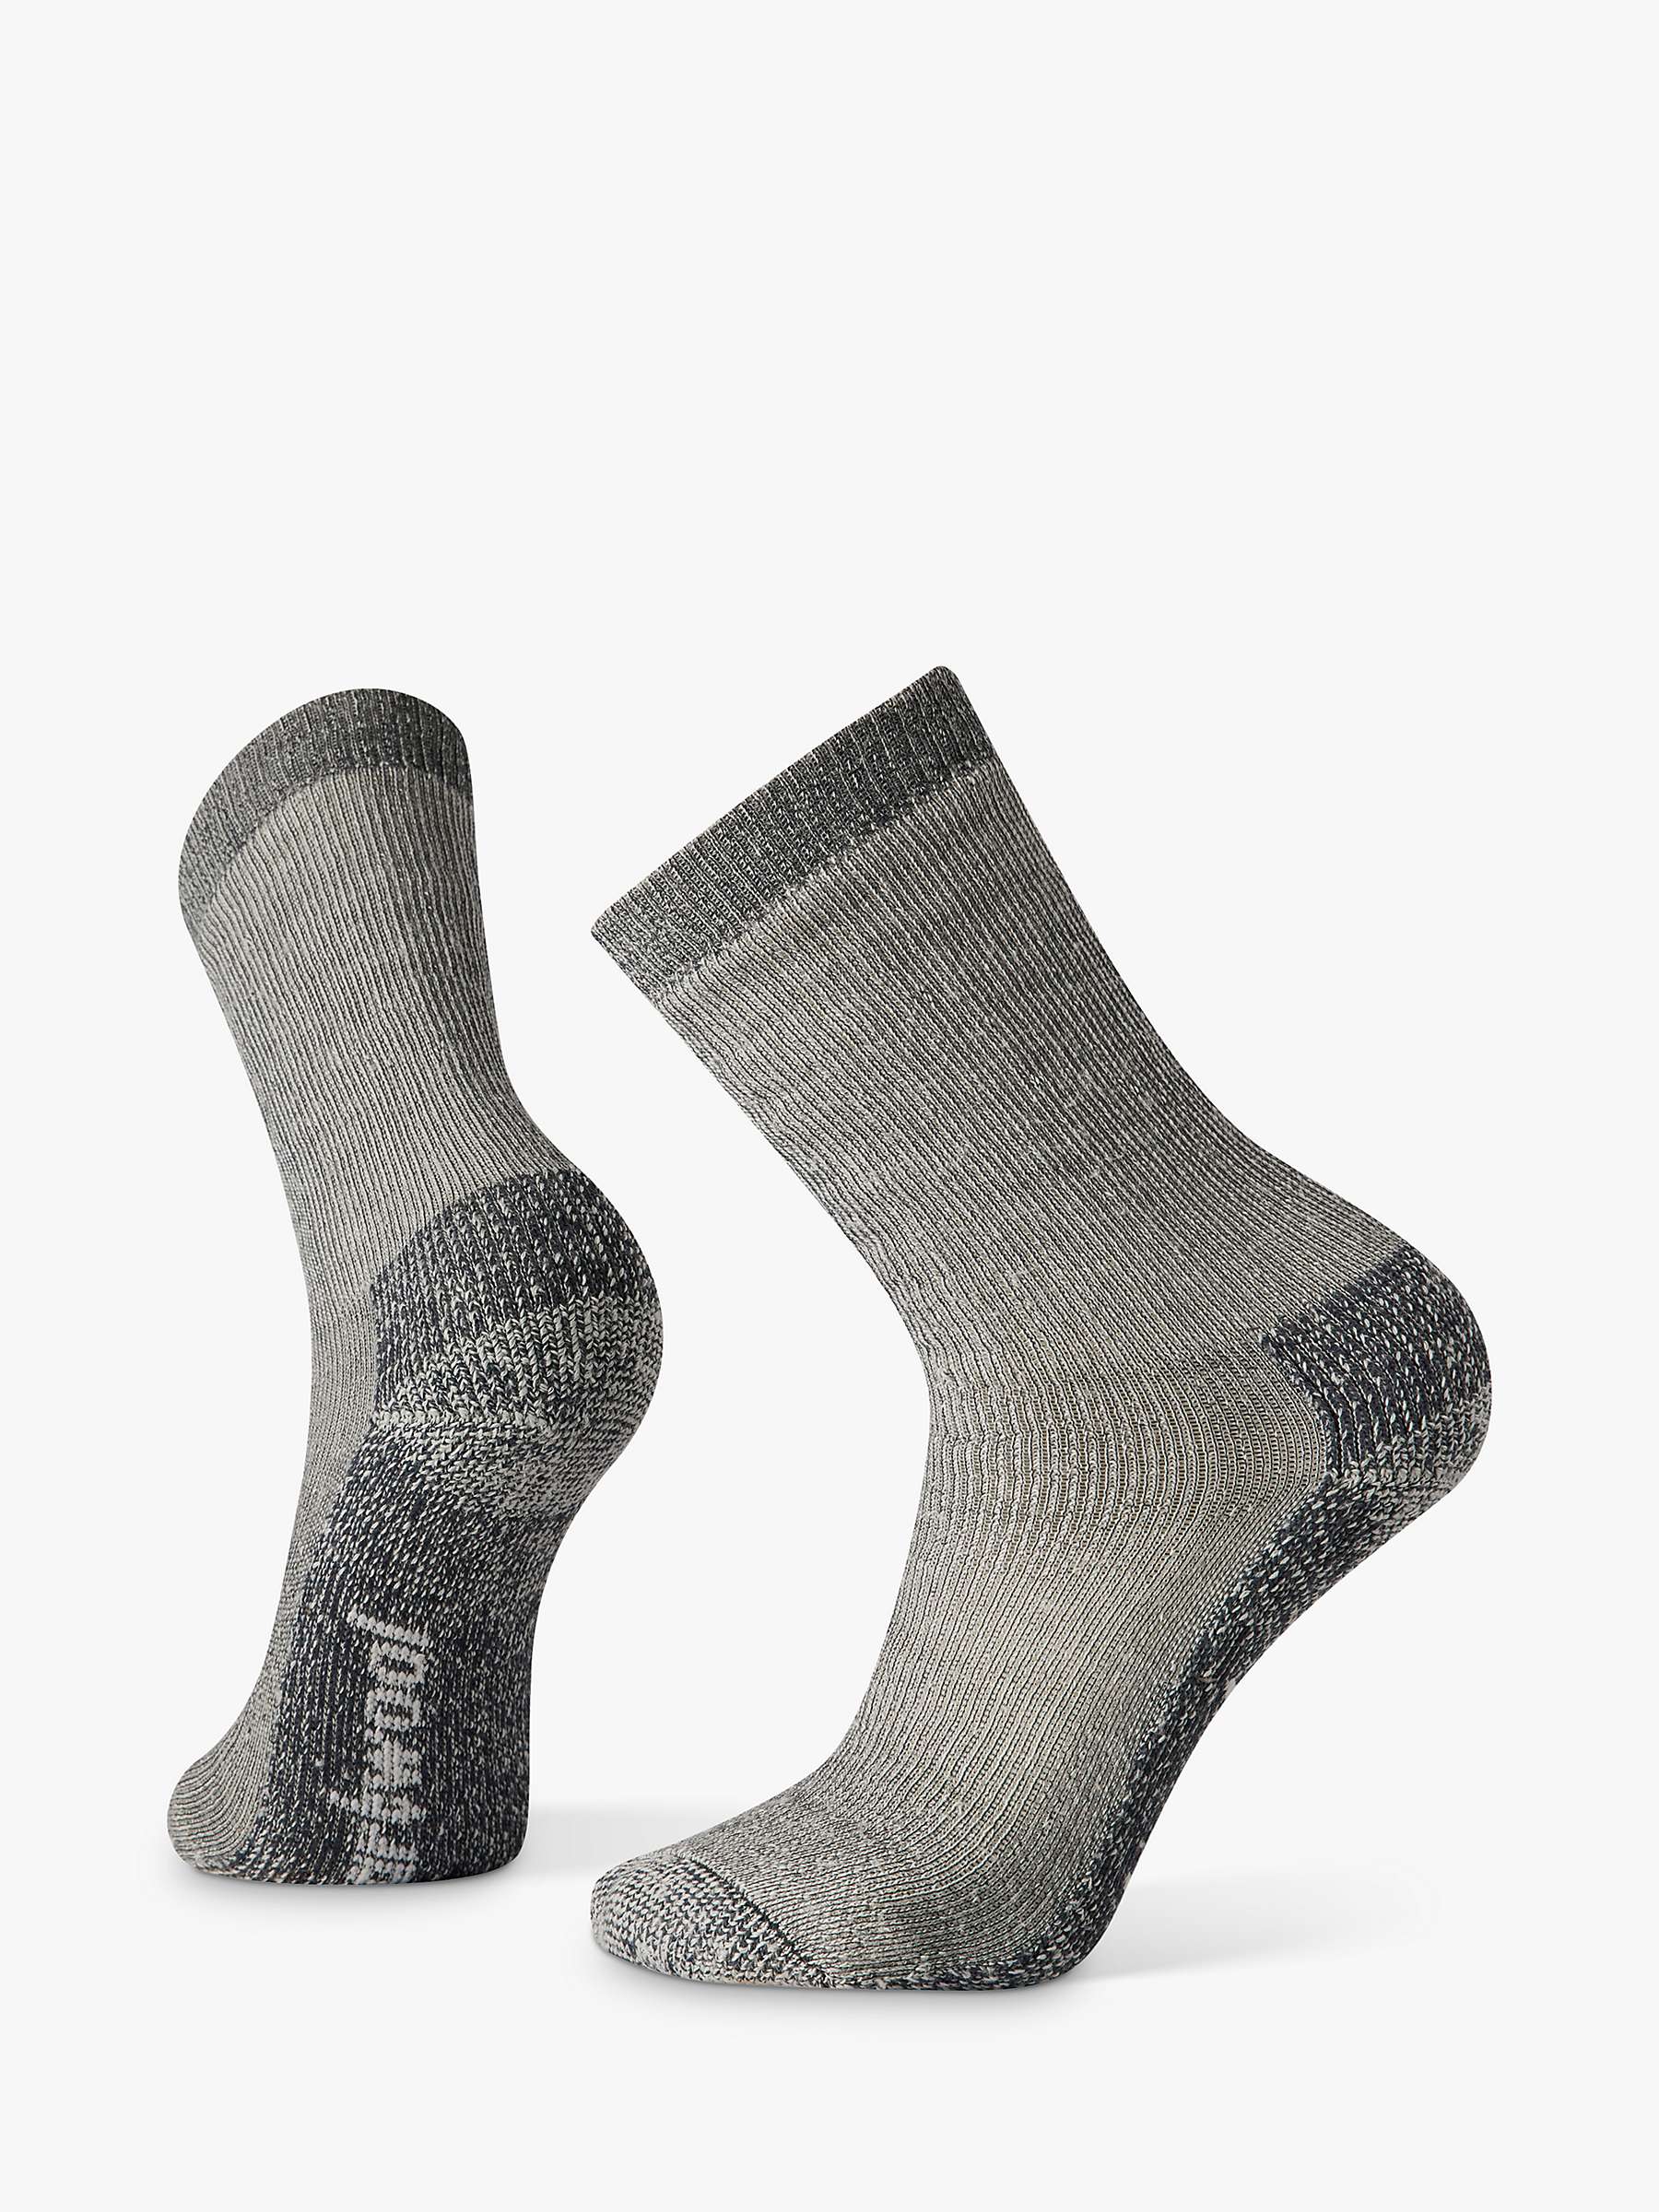 Buy SmartWool Hike Classic Edition Extra Cushion Crew Socks Online at johnlewis.com